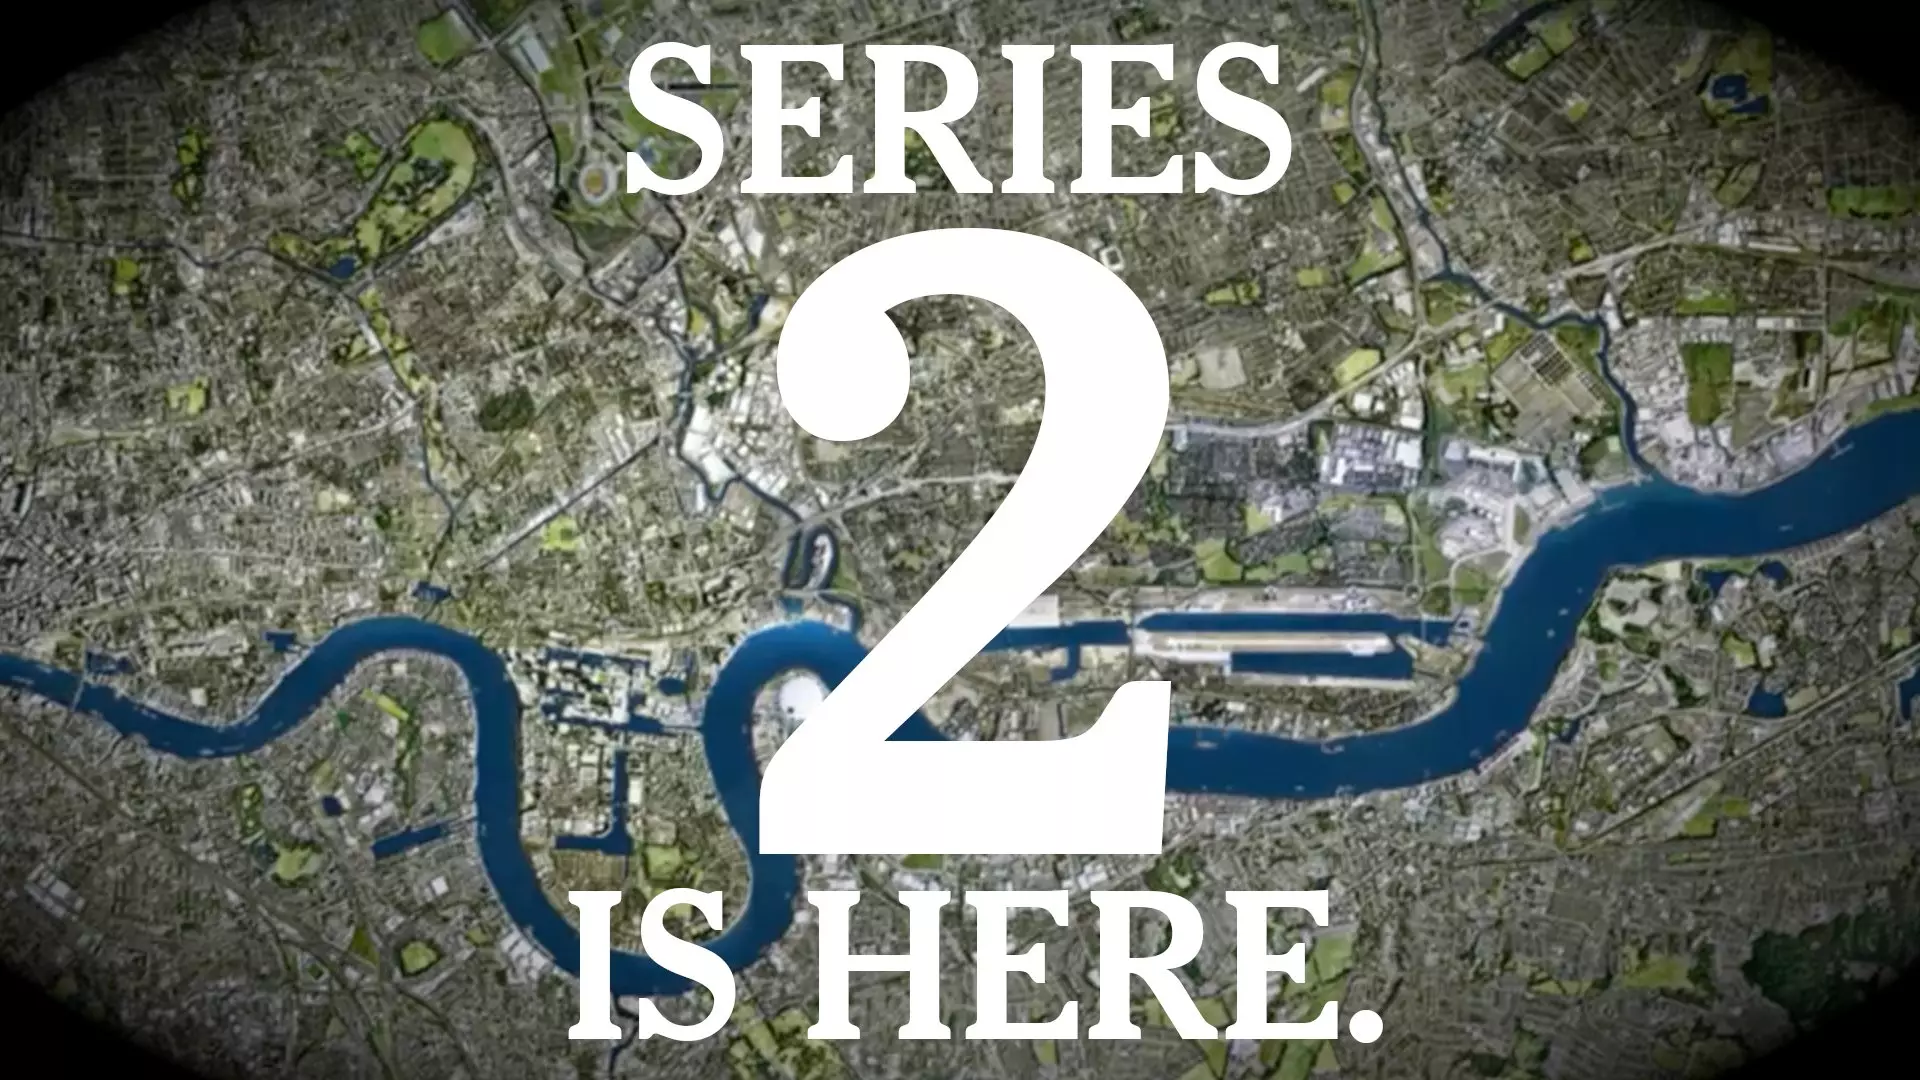 EastEnders Fans Stunned As Show Claims Season 2 Has Just Begun